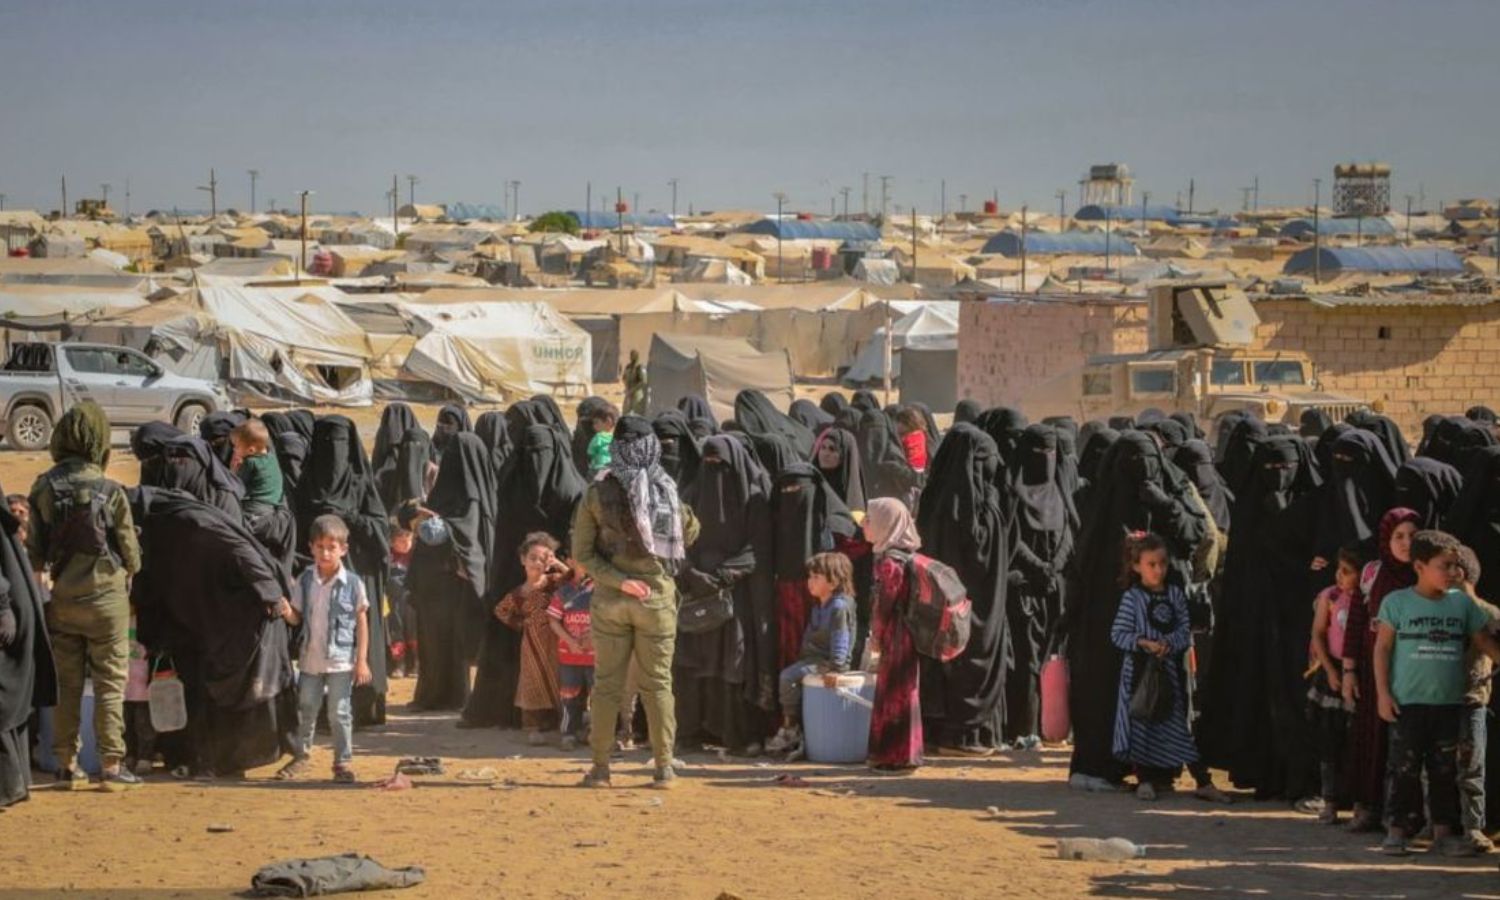 Women and children undergo safety inspection in the al-Hol camp in the east of al-Hasakah – Syria, during the "Humanity and Security" operation - August 2022 (Internal Security Forces/Facebook)